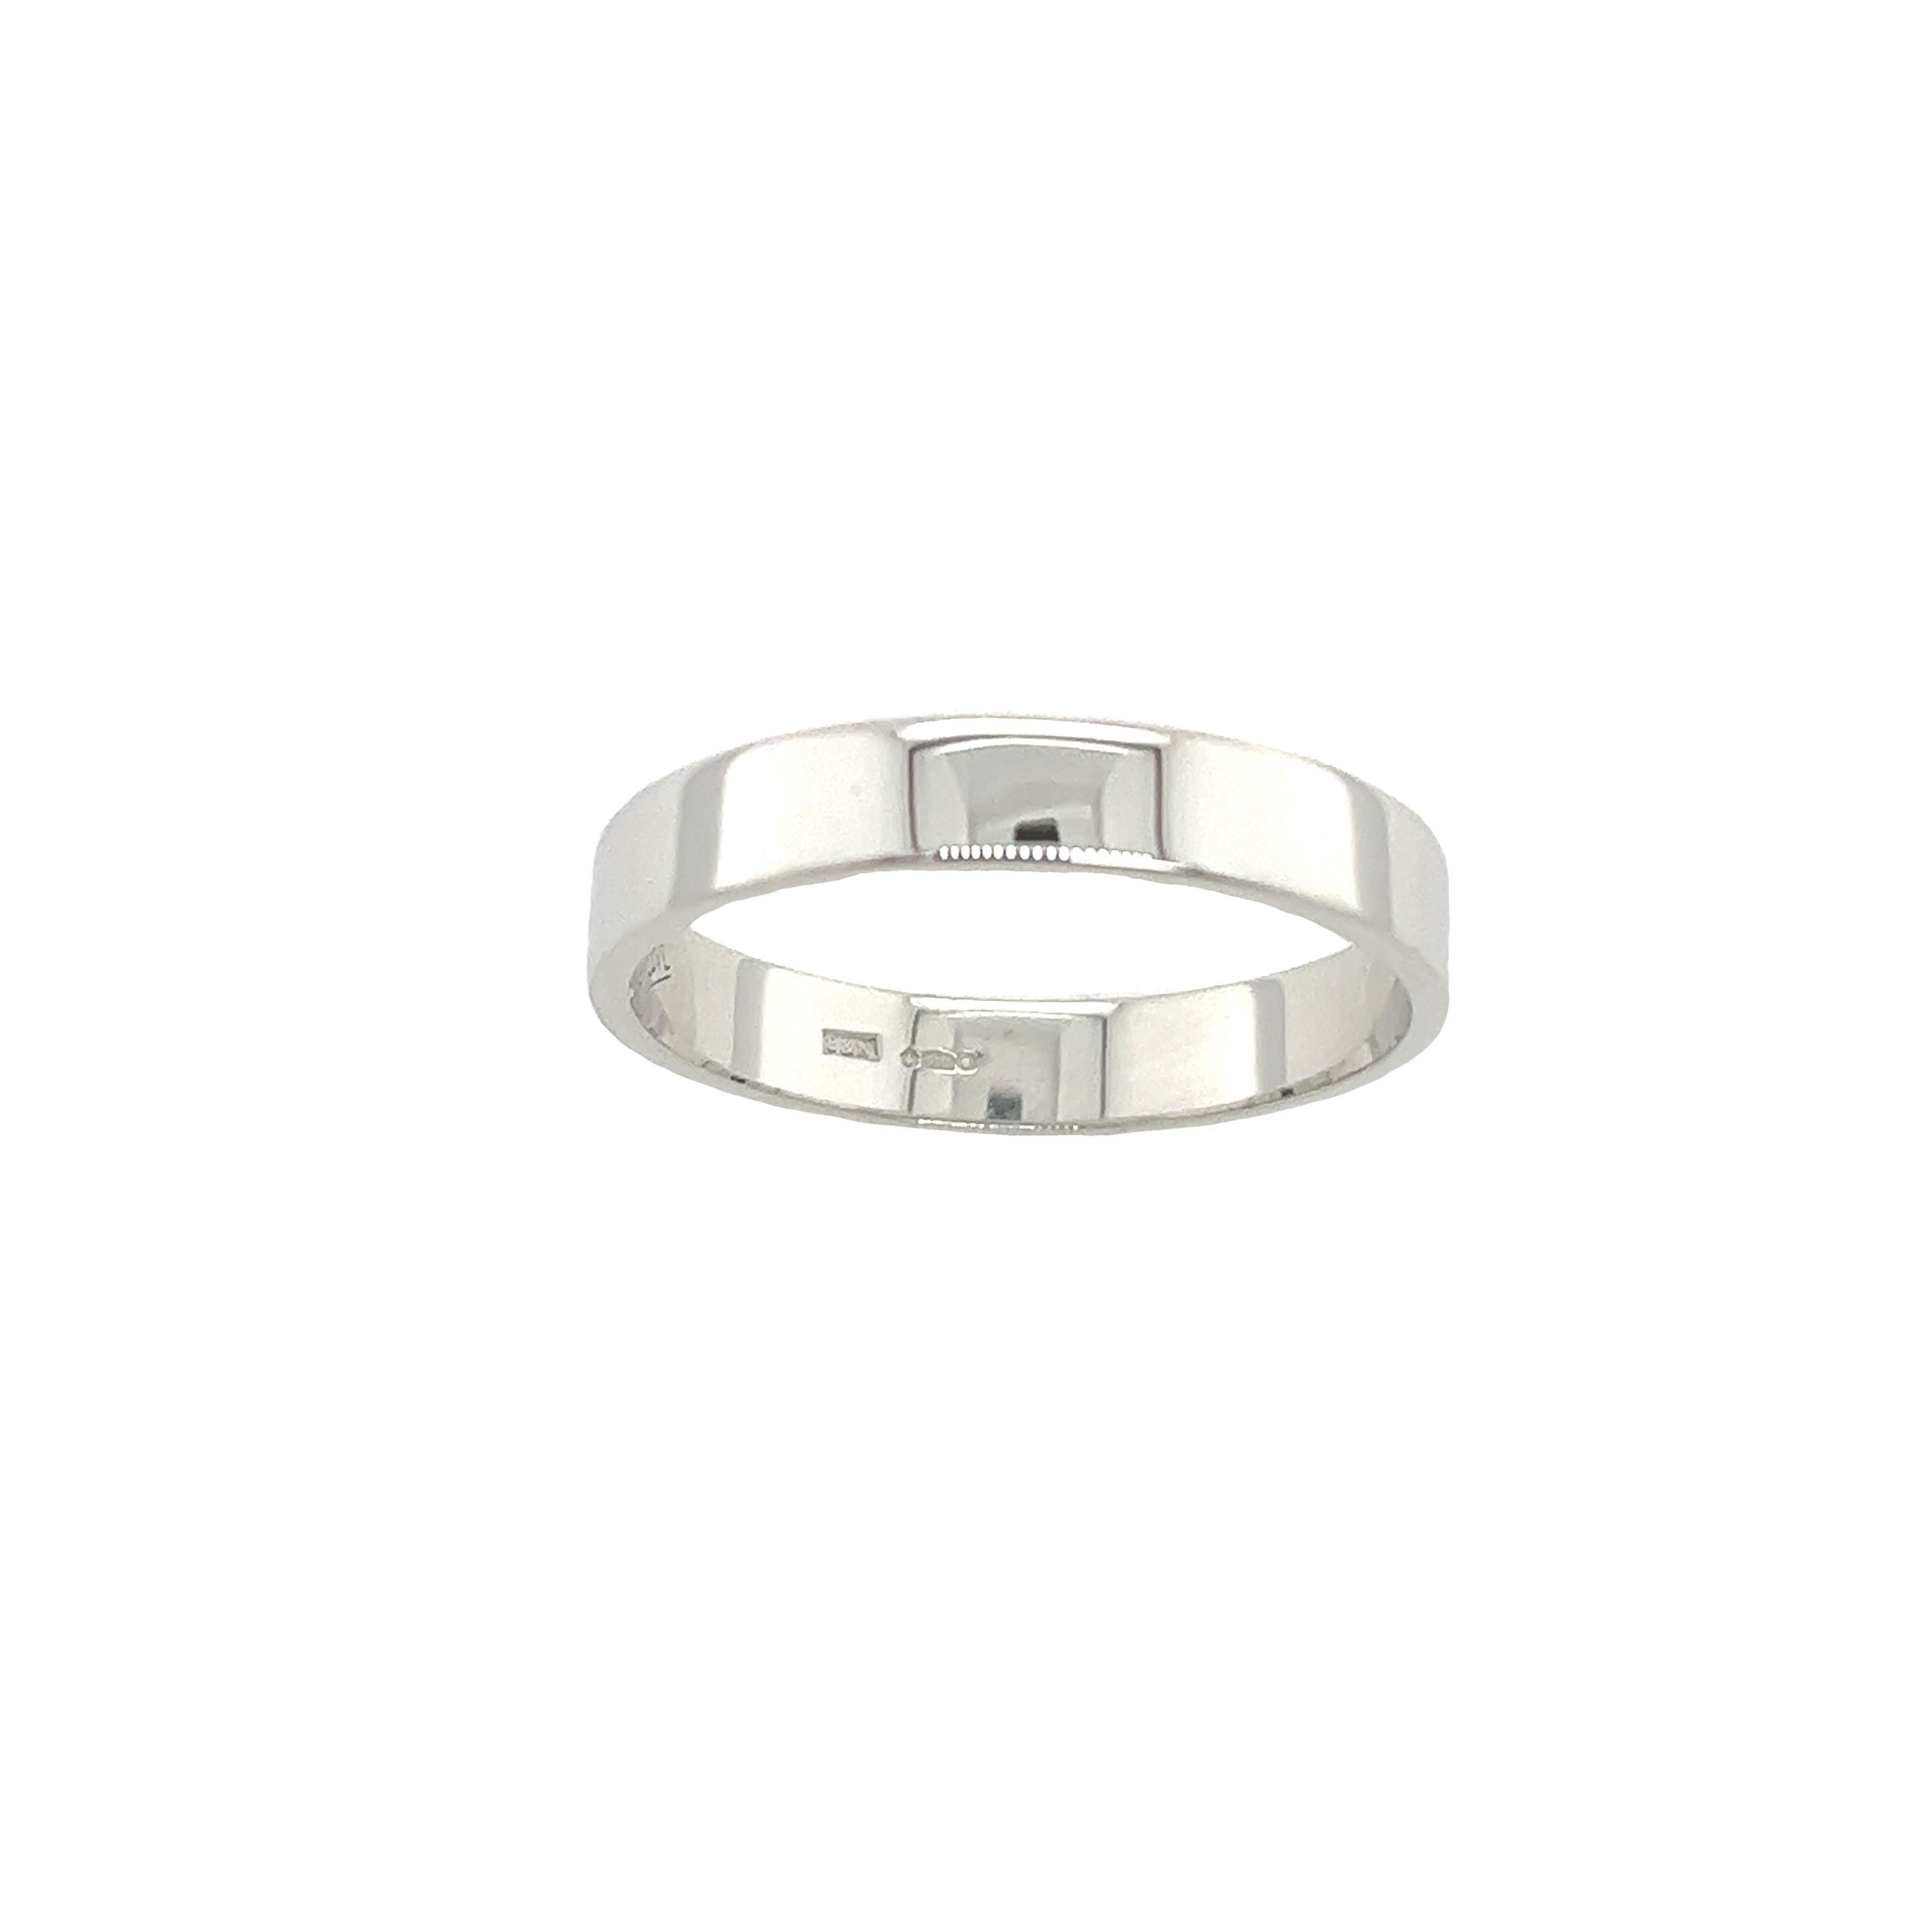 This 3.85mm wide gents wedding band is set in platinum with a shiny finish. This band showcases its unrivaled durability and everlasting beauty.

Width of Band: 3.85mm
Total Weight: 5.8g
Ring Size: T